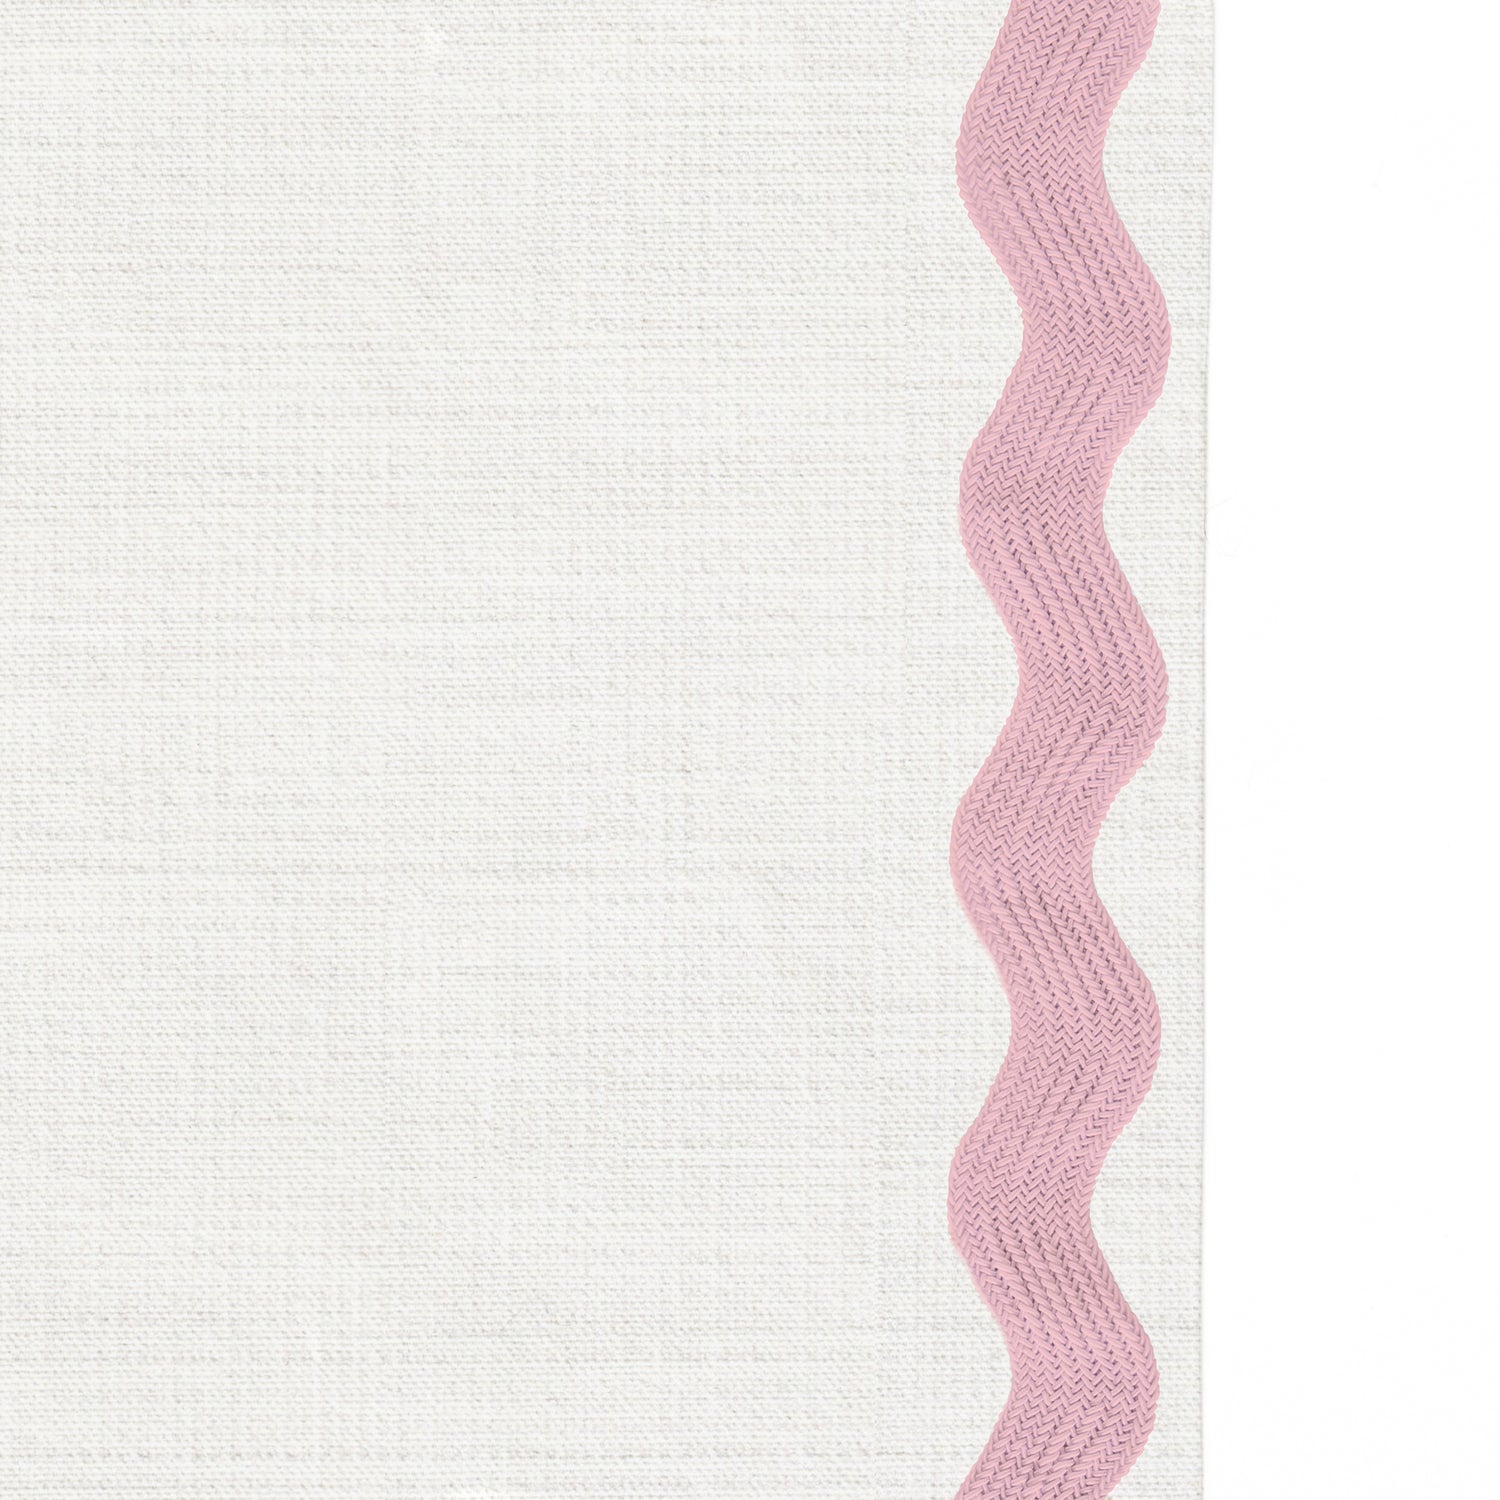 Upclose picture of Snow custom shower curtain with peony rick rack trim